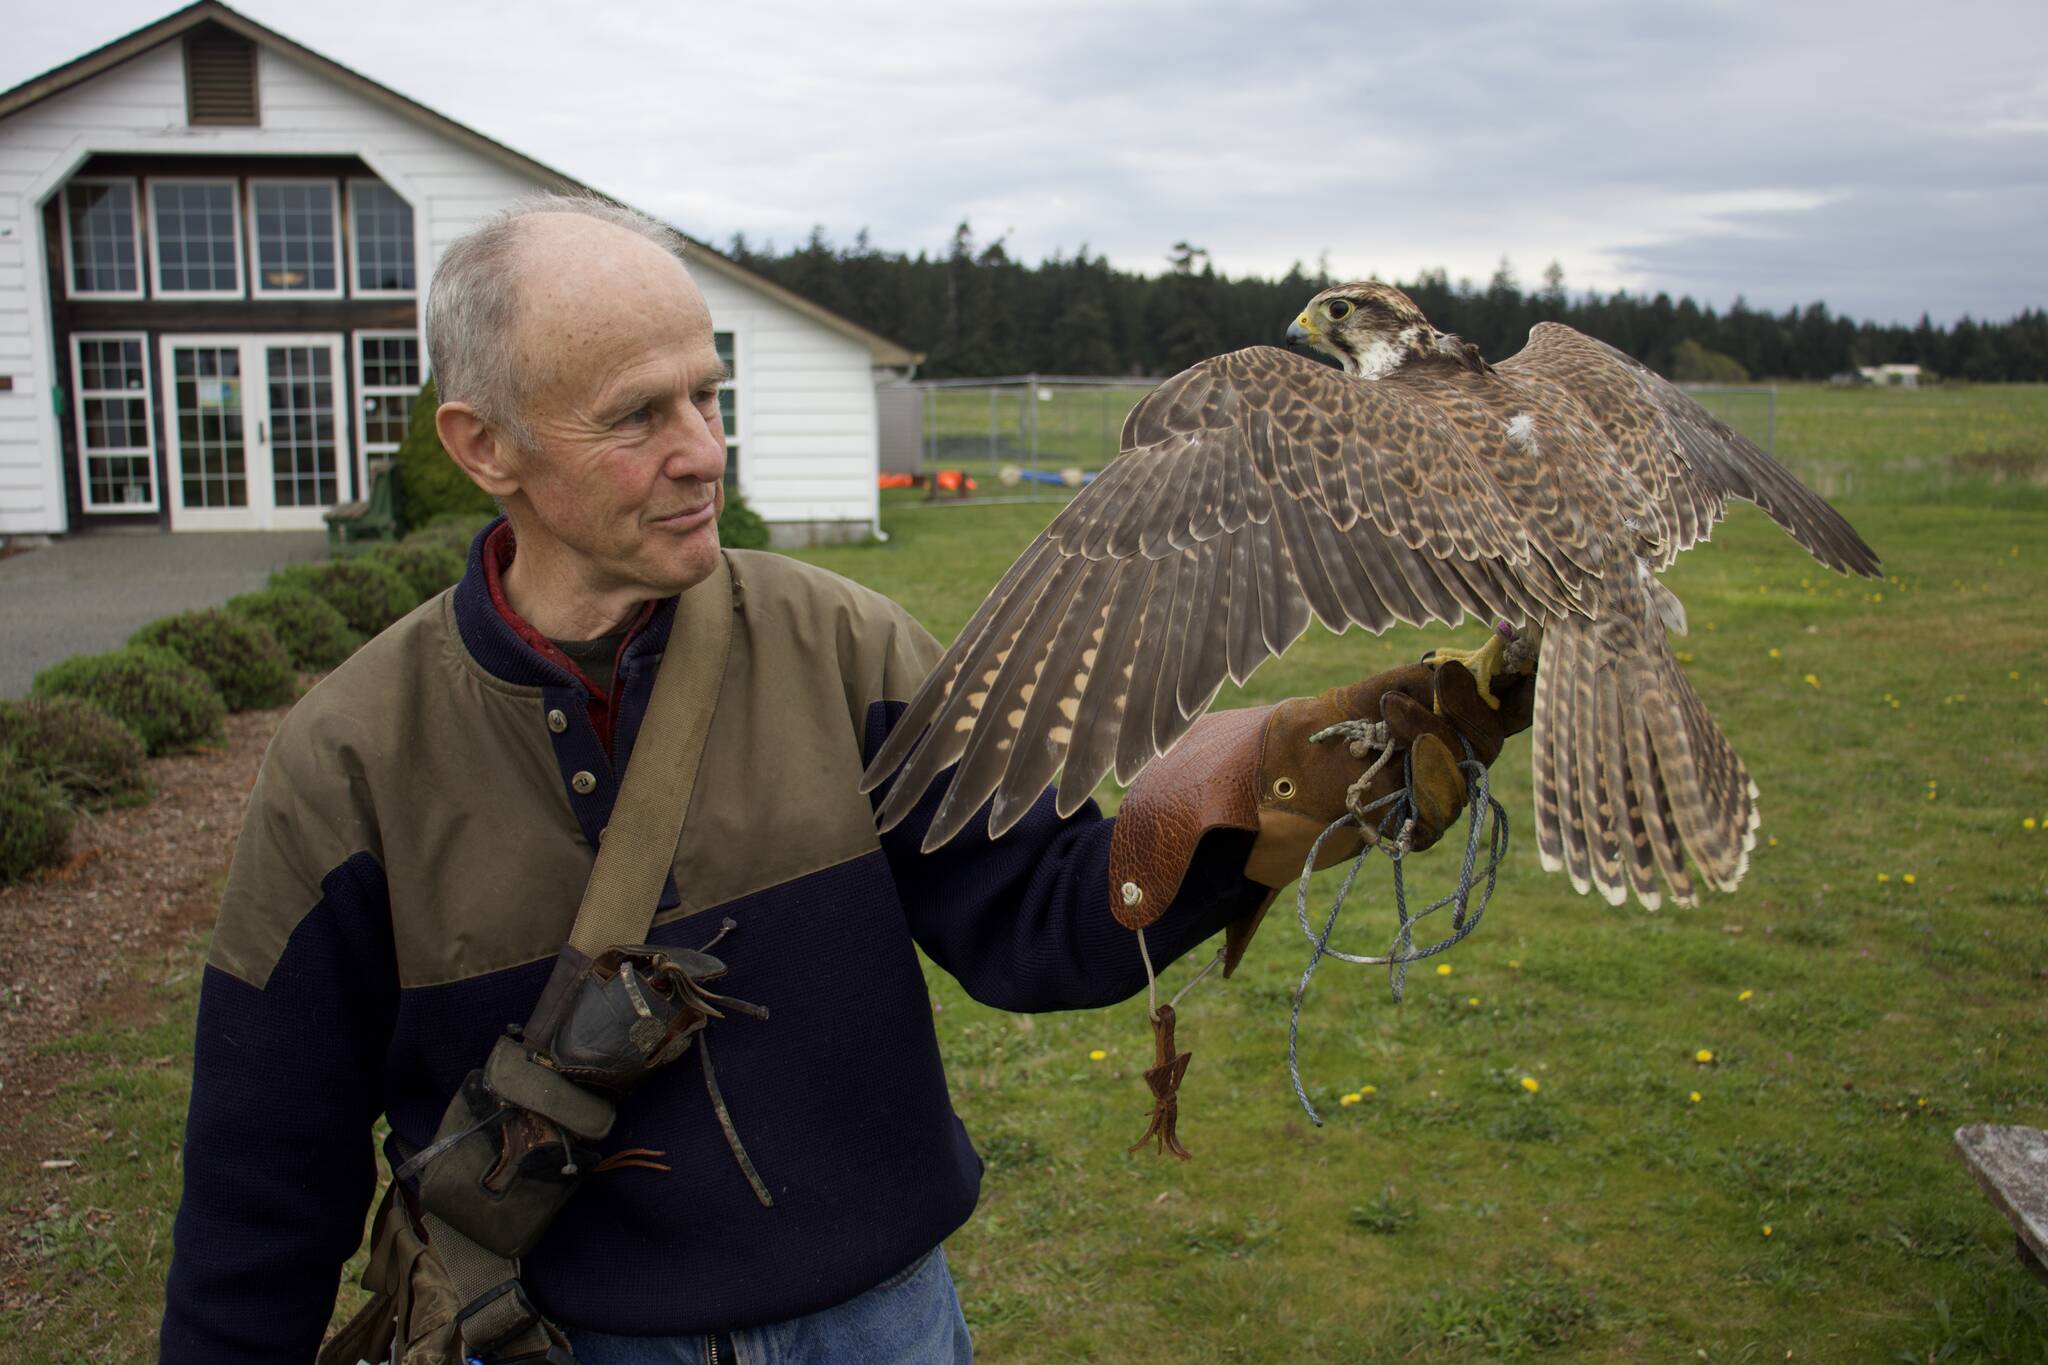 Photo by Rachel Rosen/Whidbey News-Times
Steve Layman will be giving a presentation on raptors this Saturday at the Pacific Rim Institute in Coupeville.